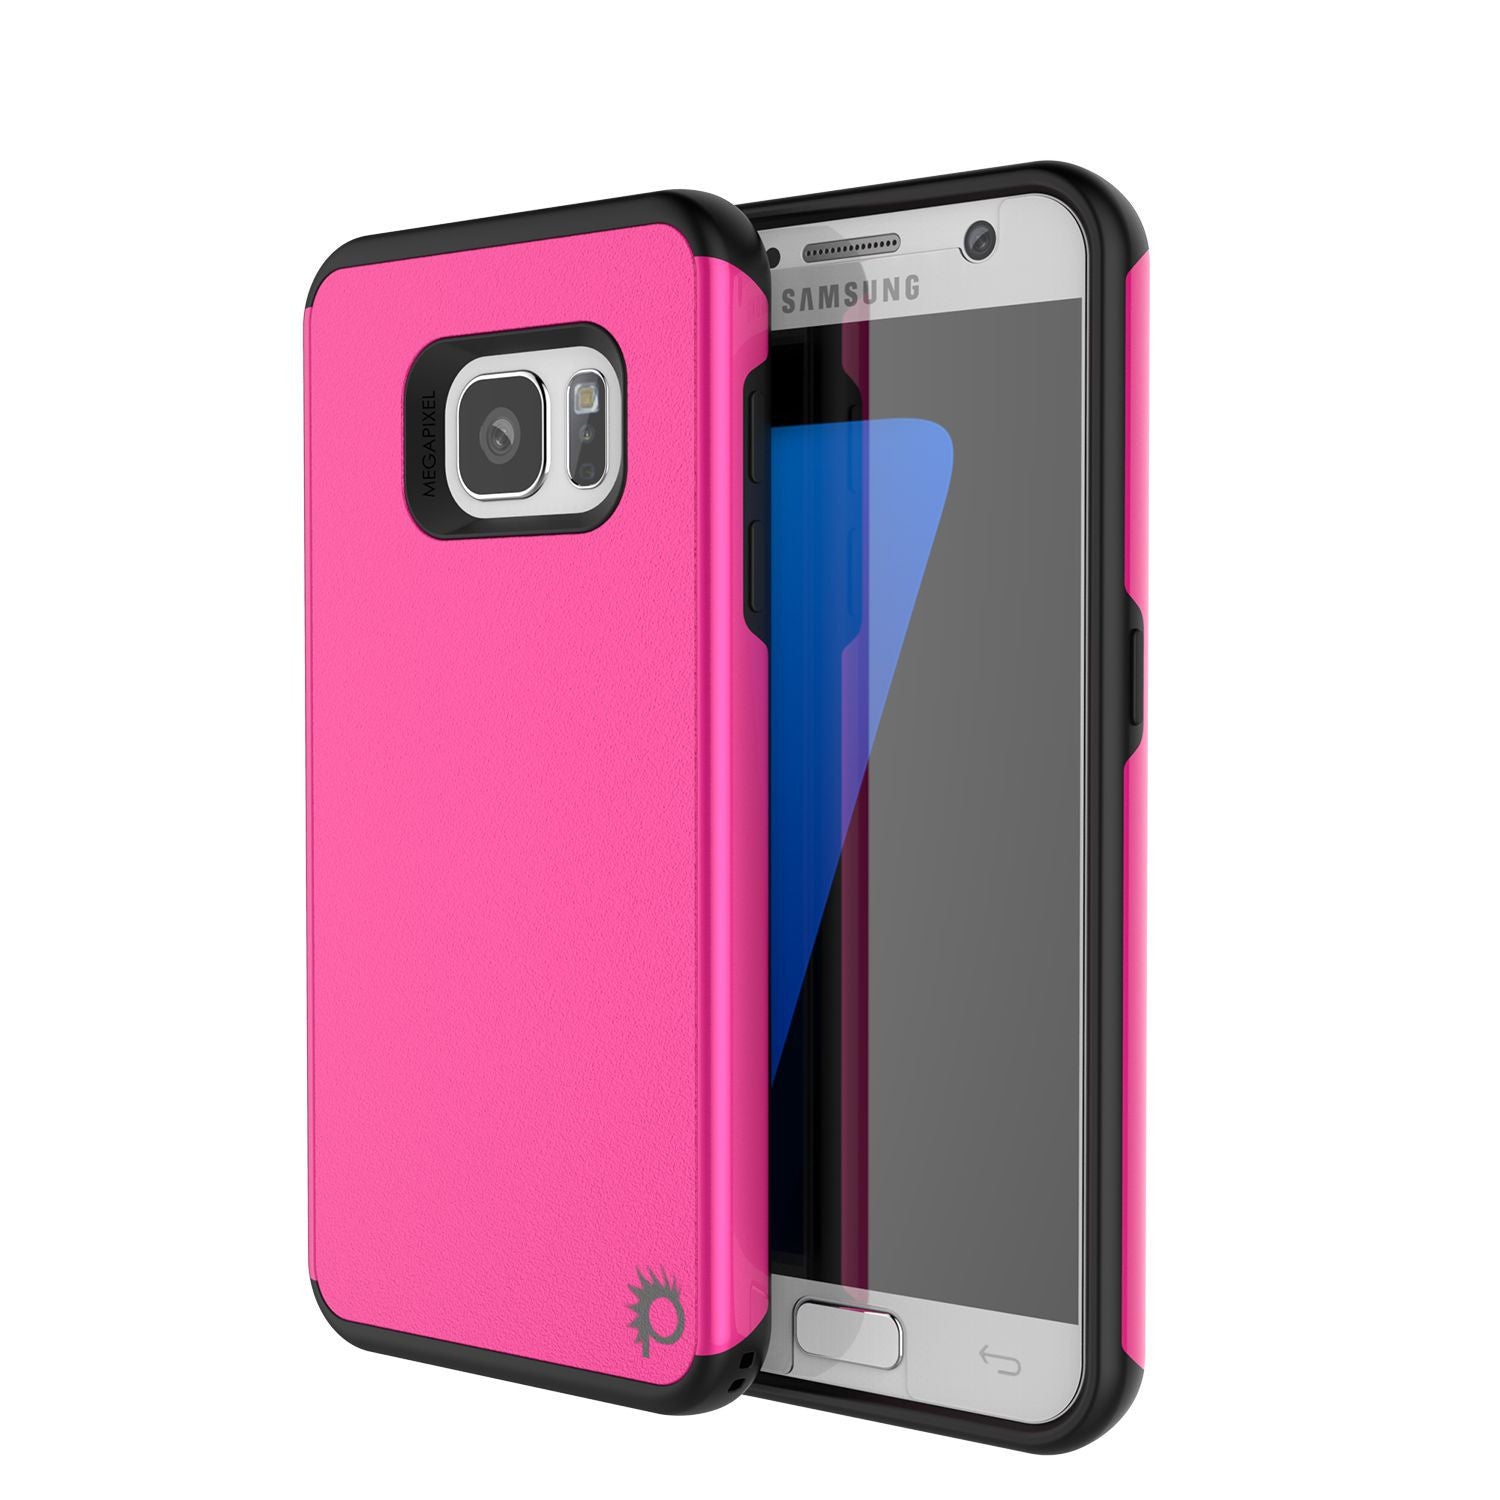 PUNKCASE - Galatic Series Protective Armor Case for Samsung S7 Edge | Pink